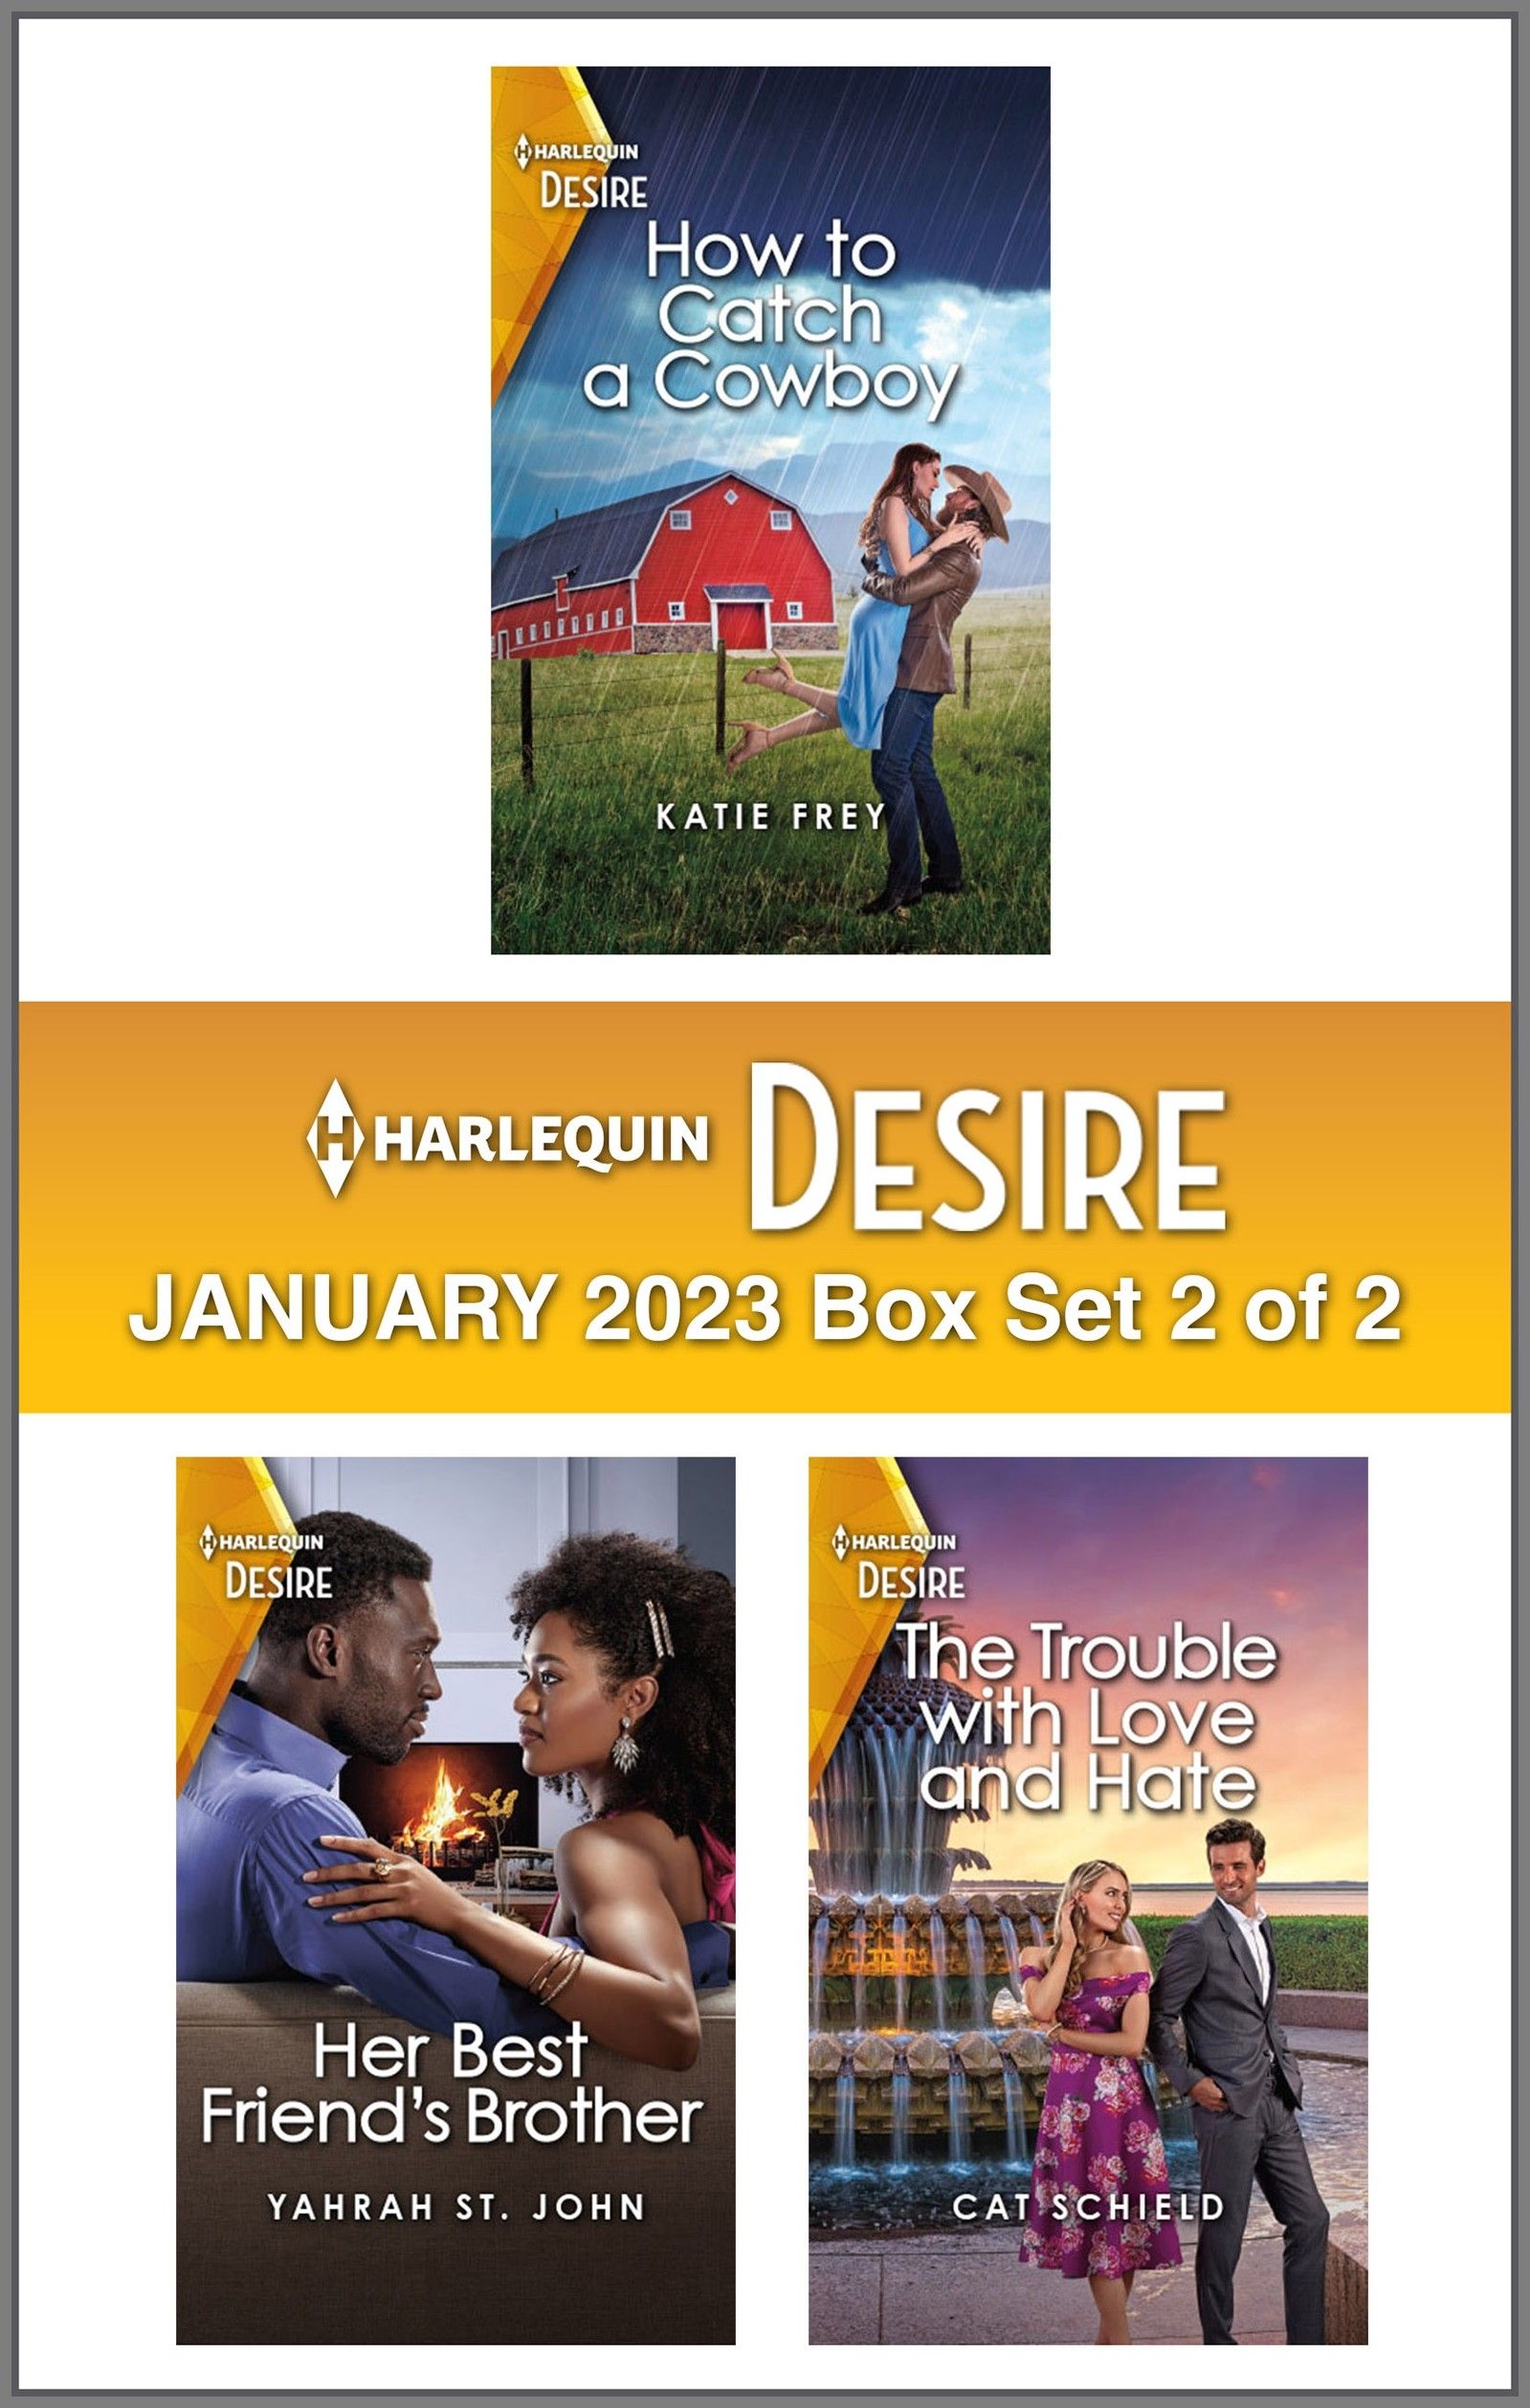 Harlequin Desire January 2023 Box Set 2 of 2 by Katie Frey Read on